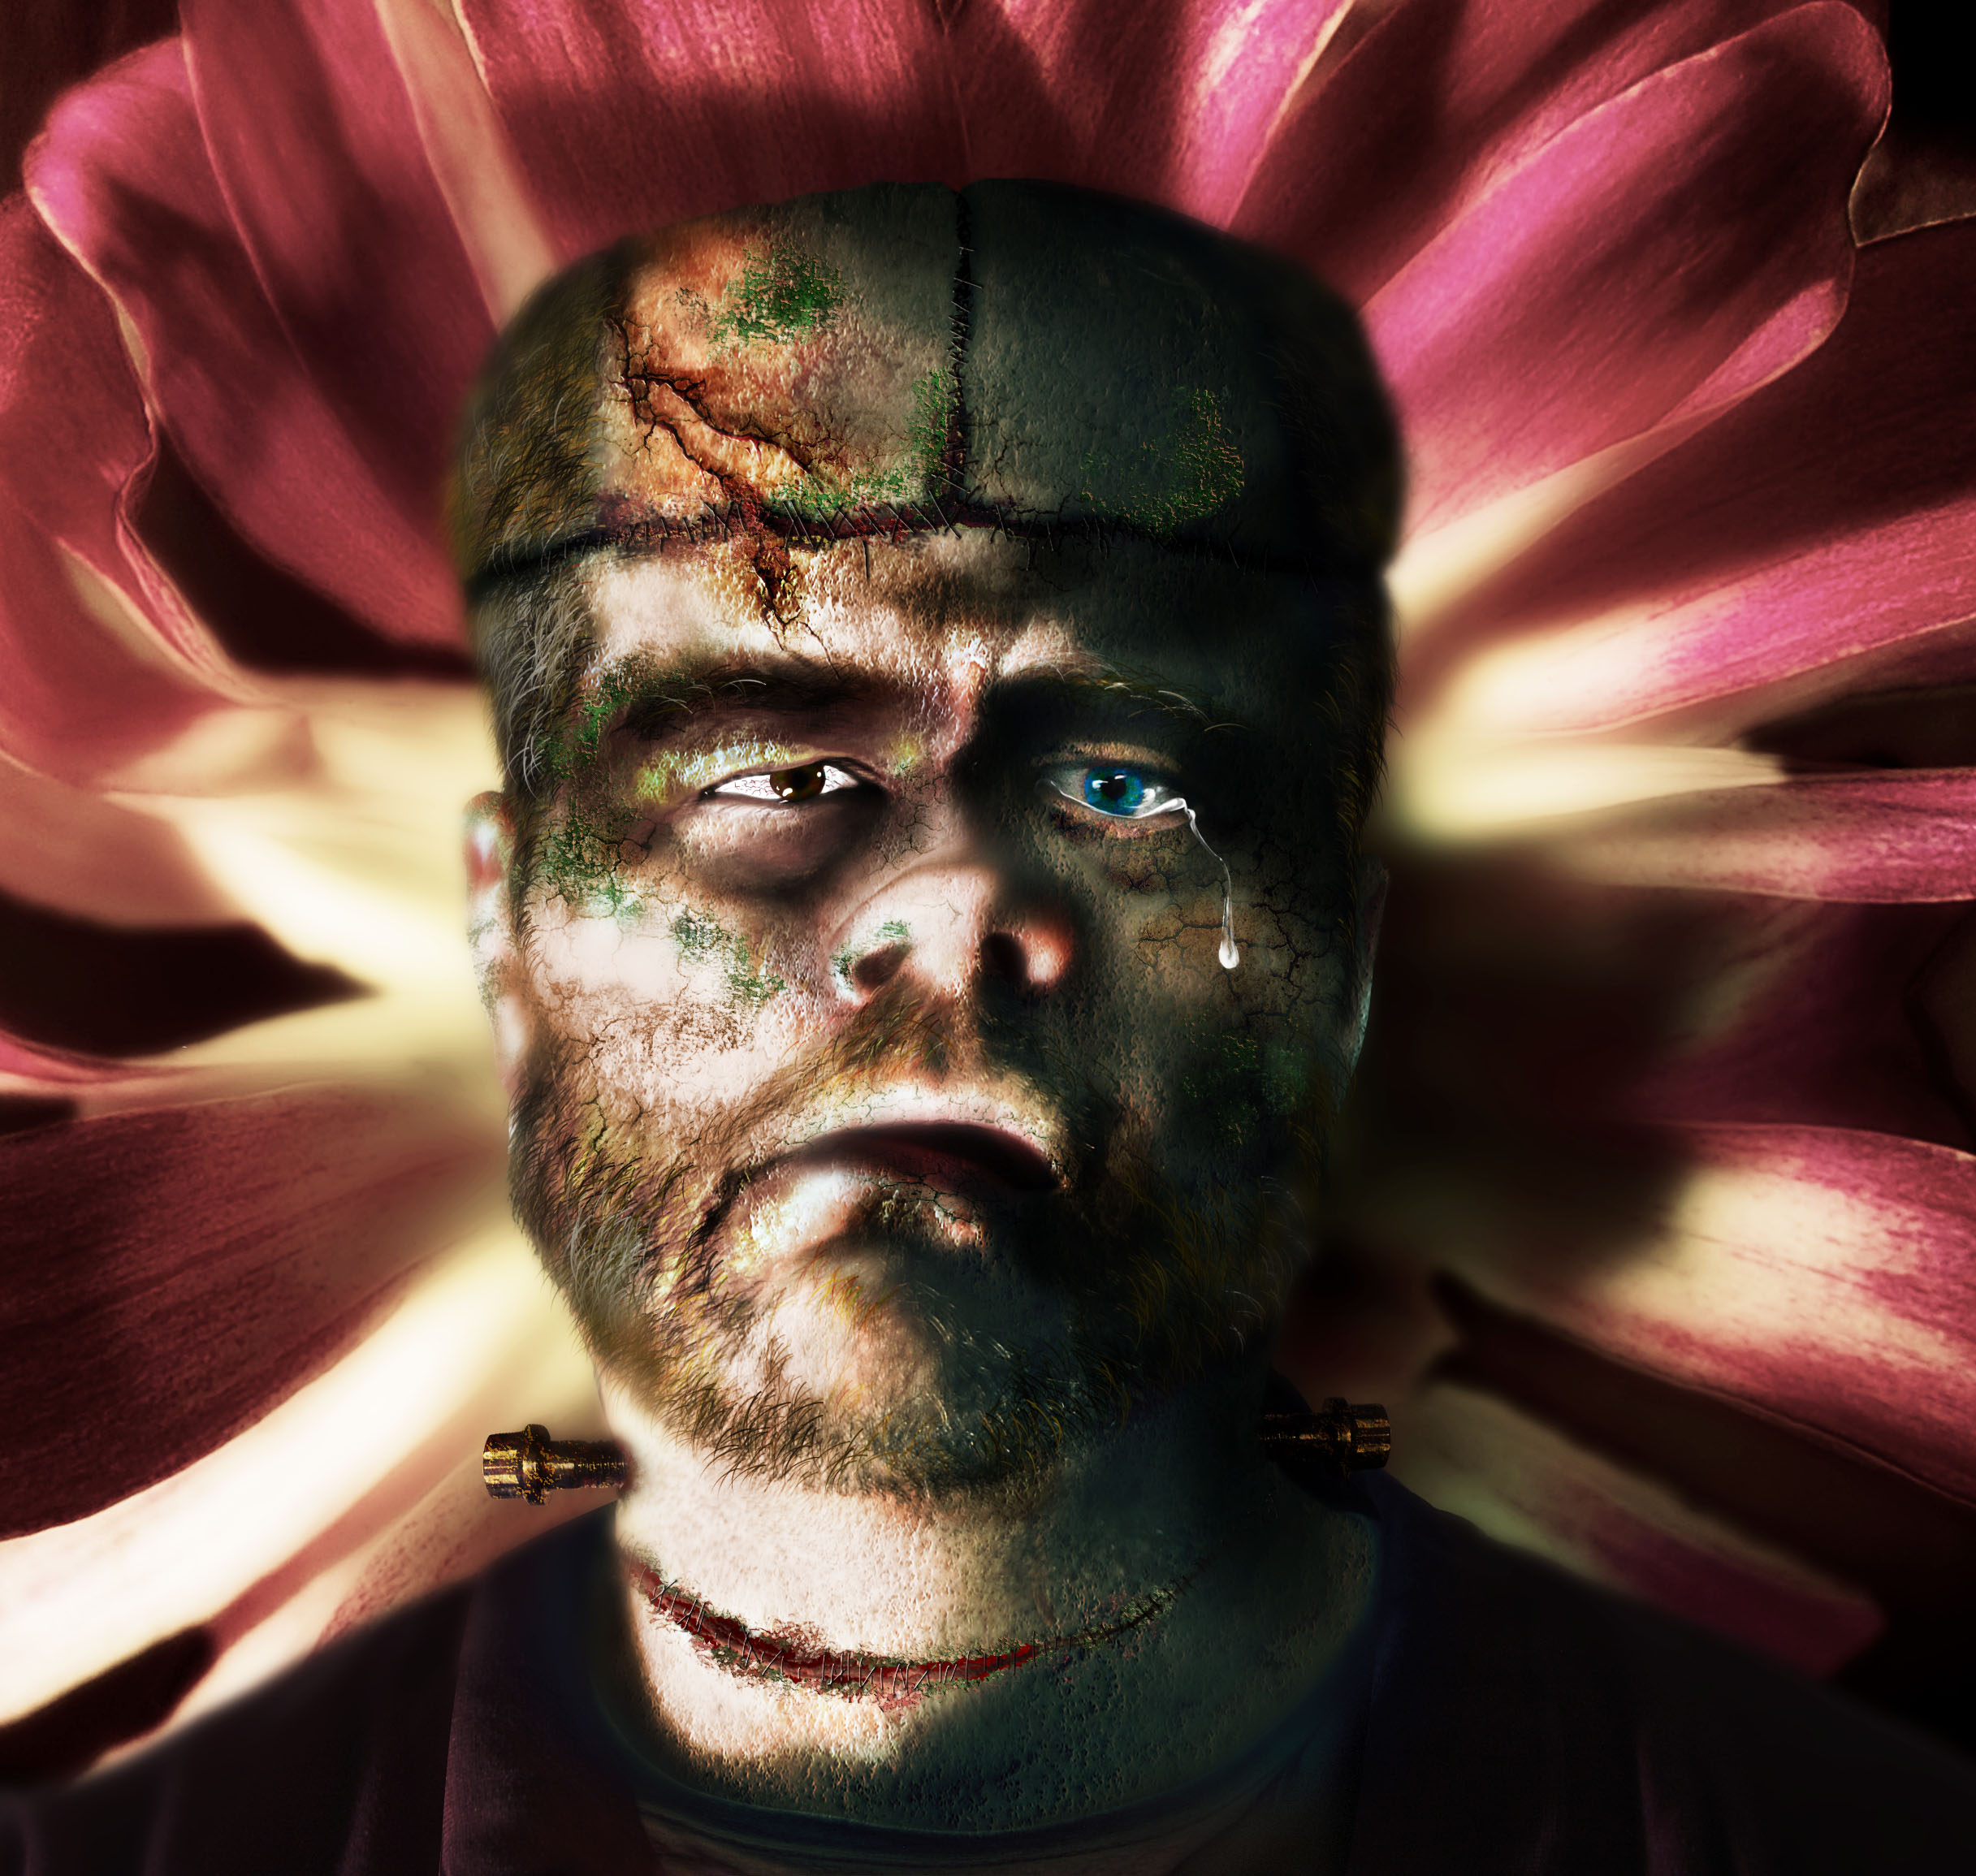 Demo for Monster photo manipulation project